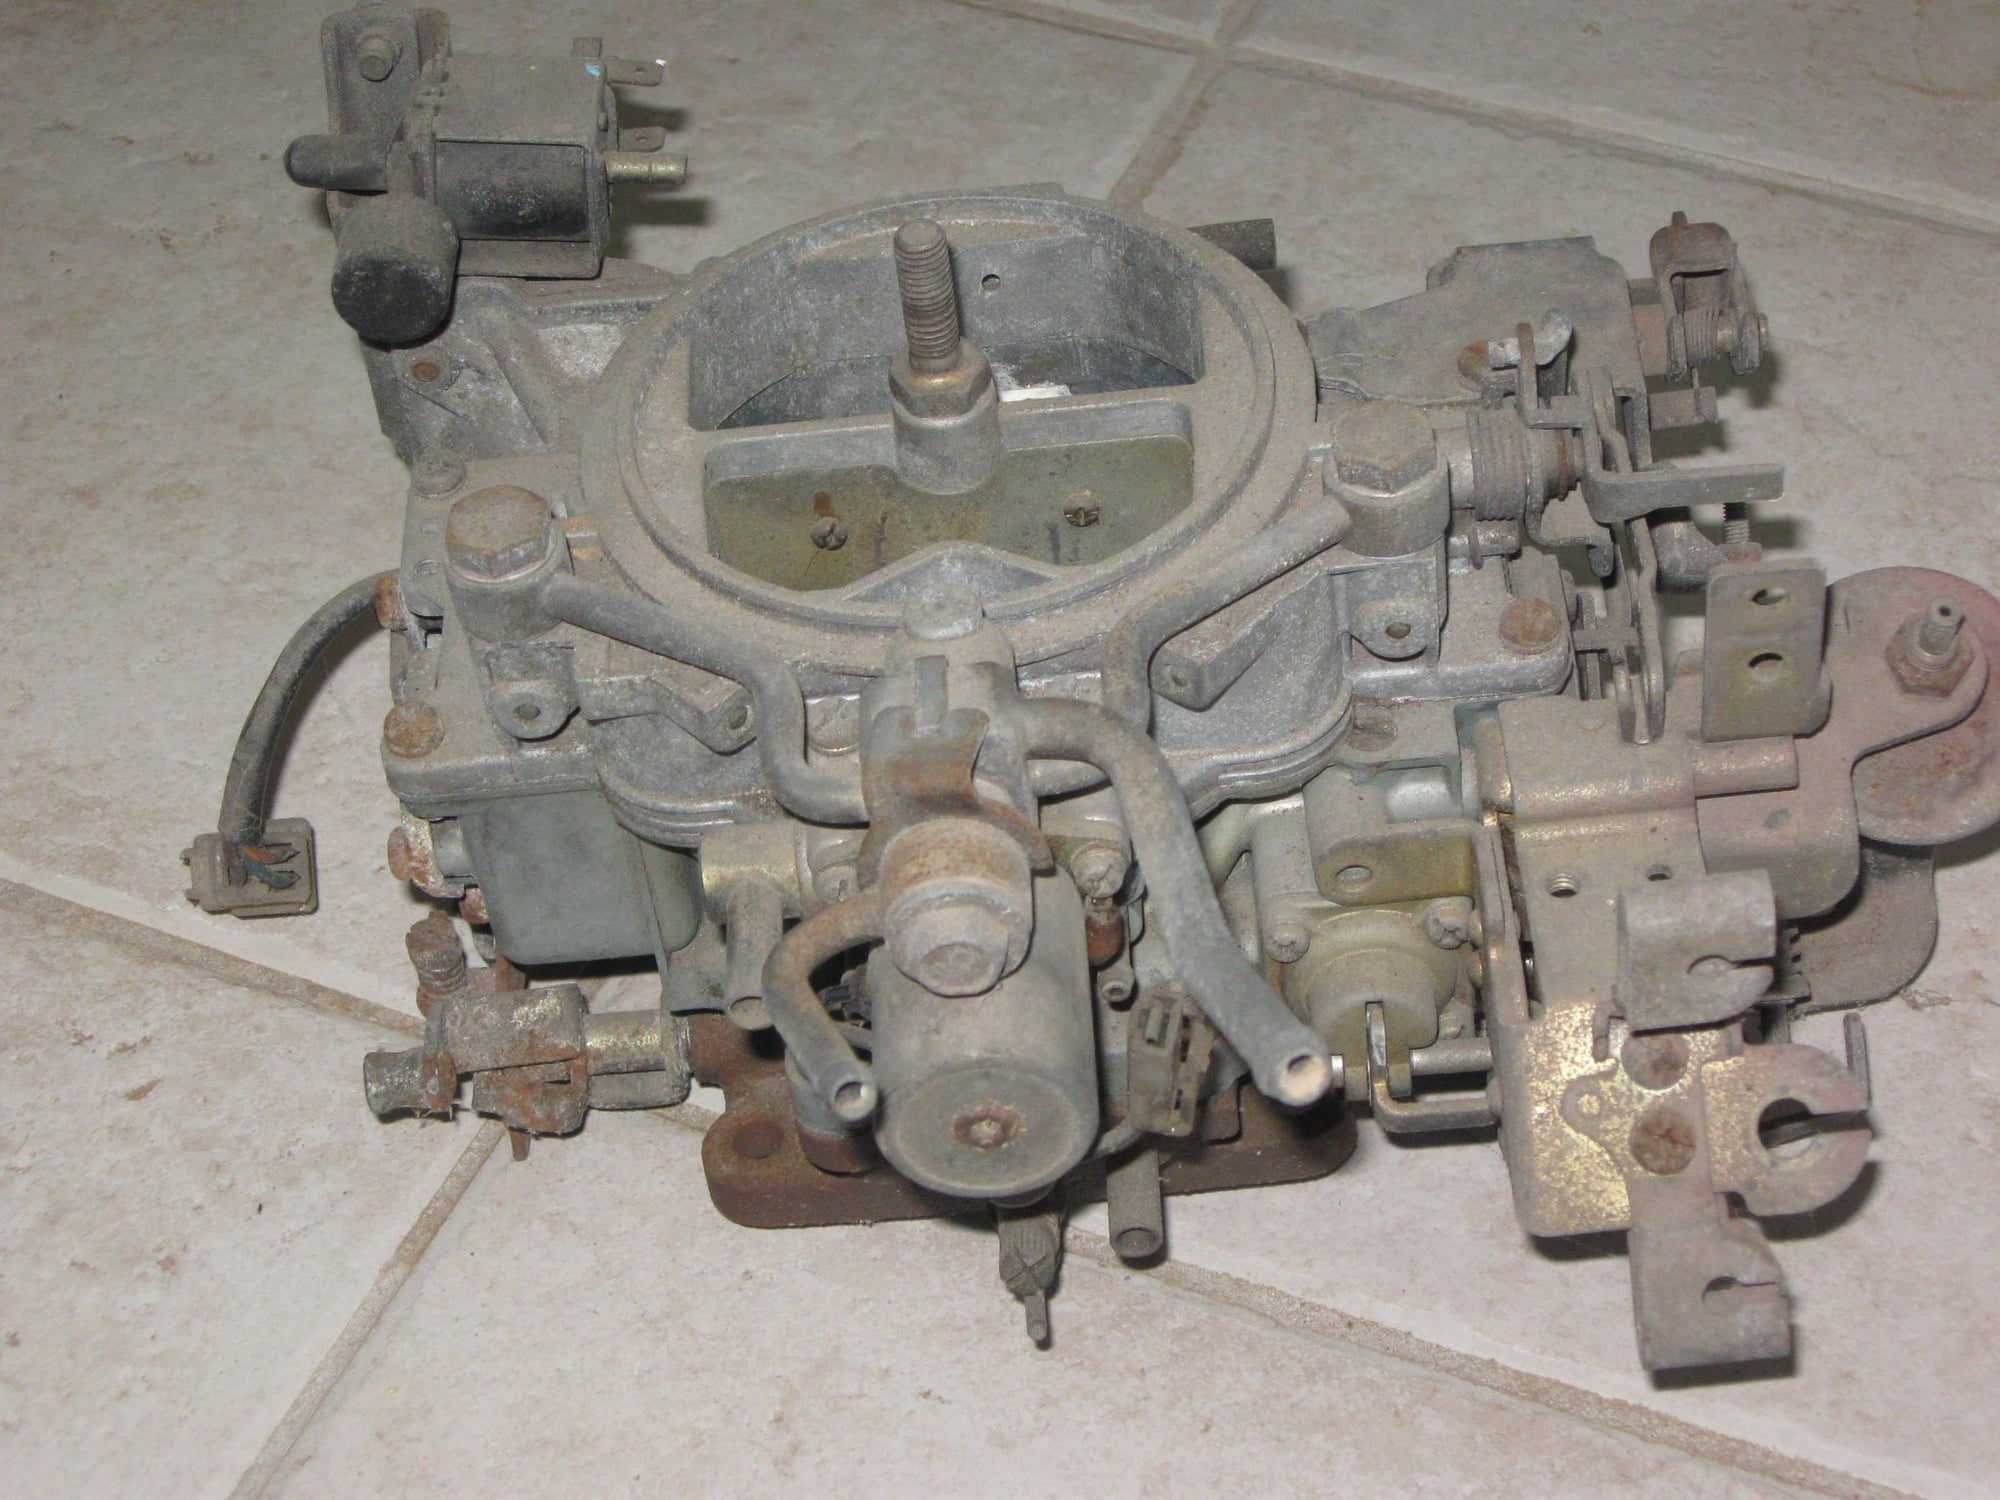 Engine - Intake/Fuel - 79 or 80 carb - Used - 1979 to 1980 Mazda RX-7 - Brenham, TX 77833, United States